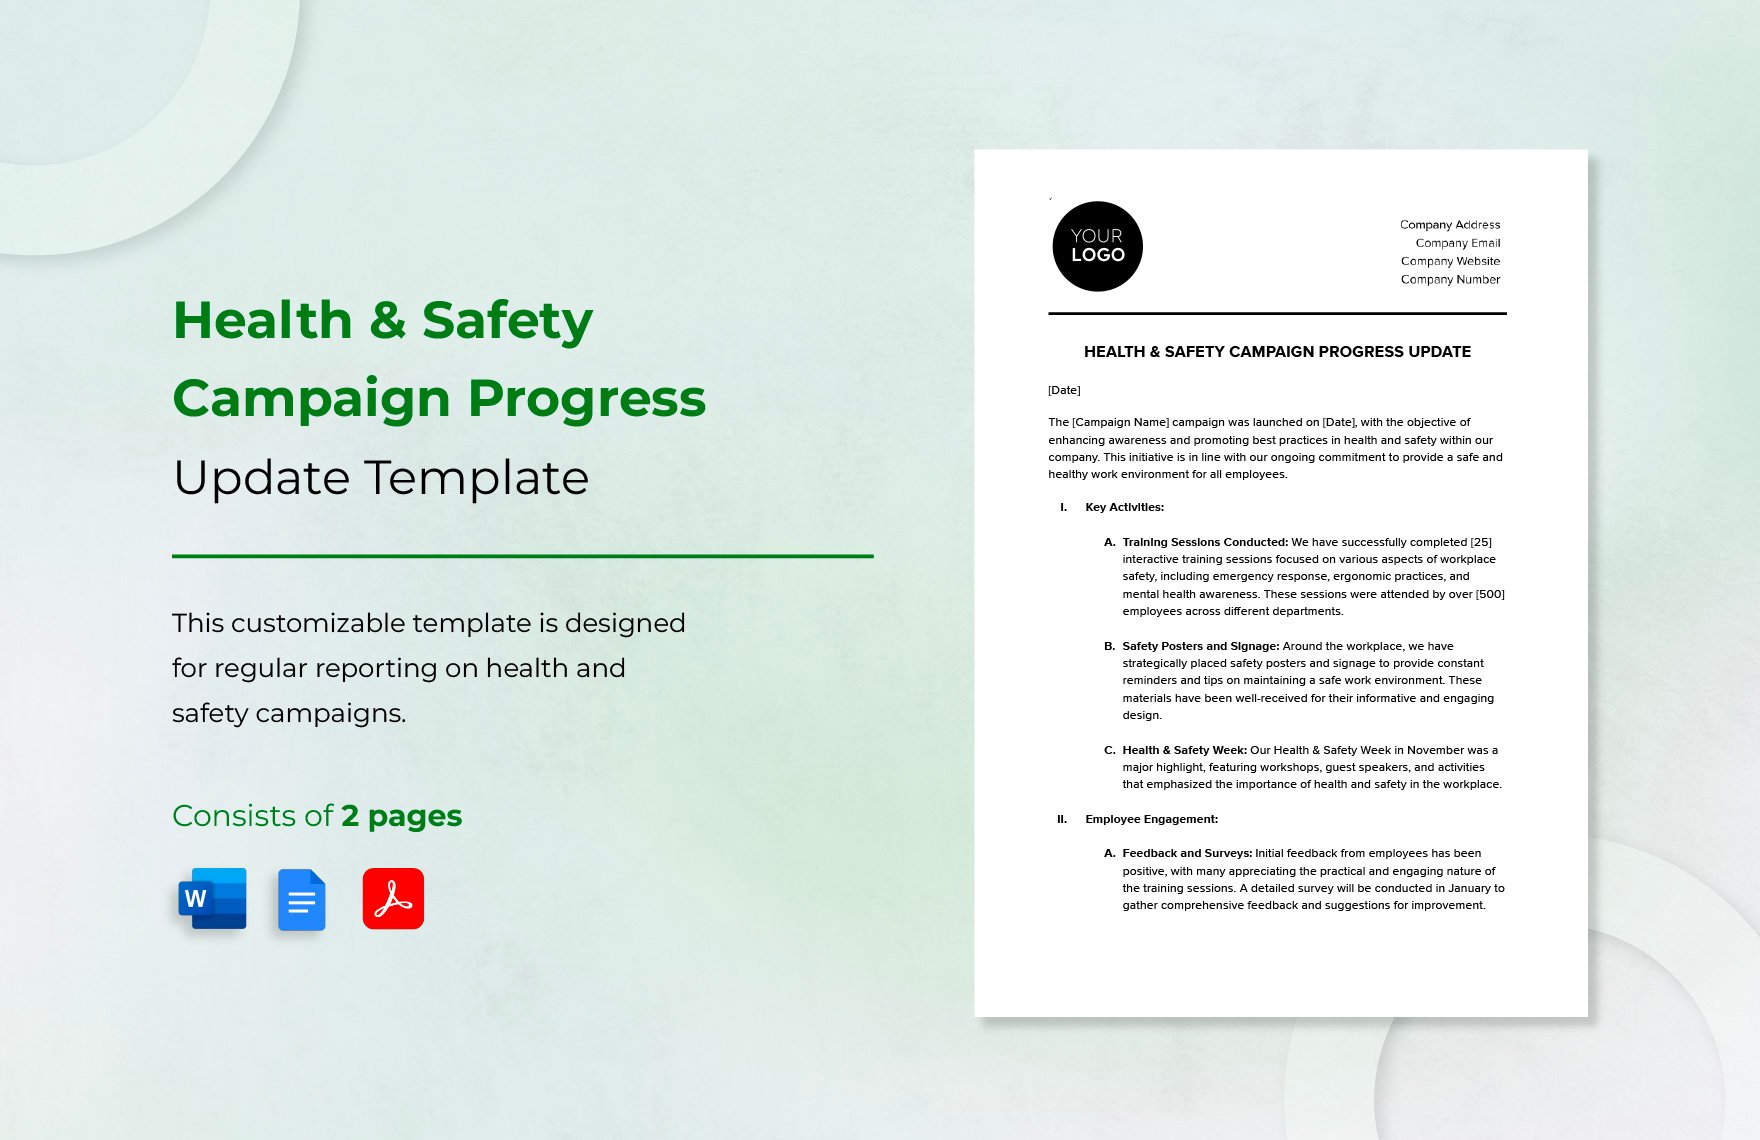 Health & Safety Campaign Progress Update Template